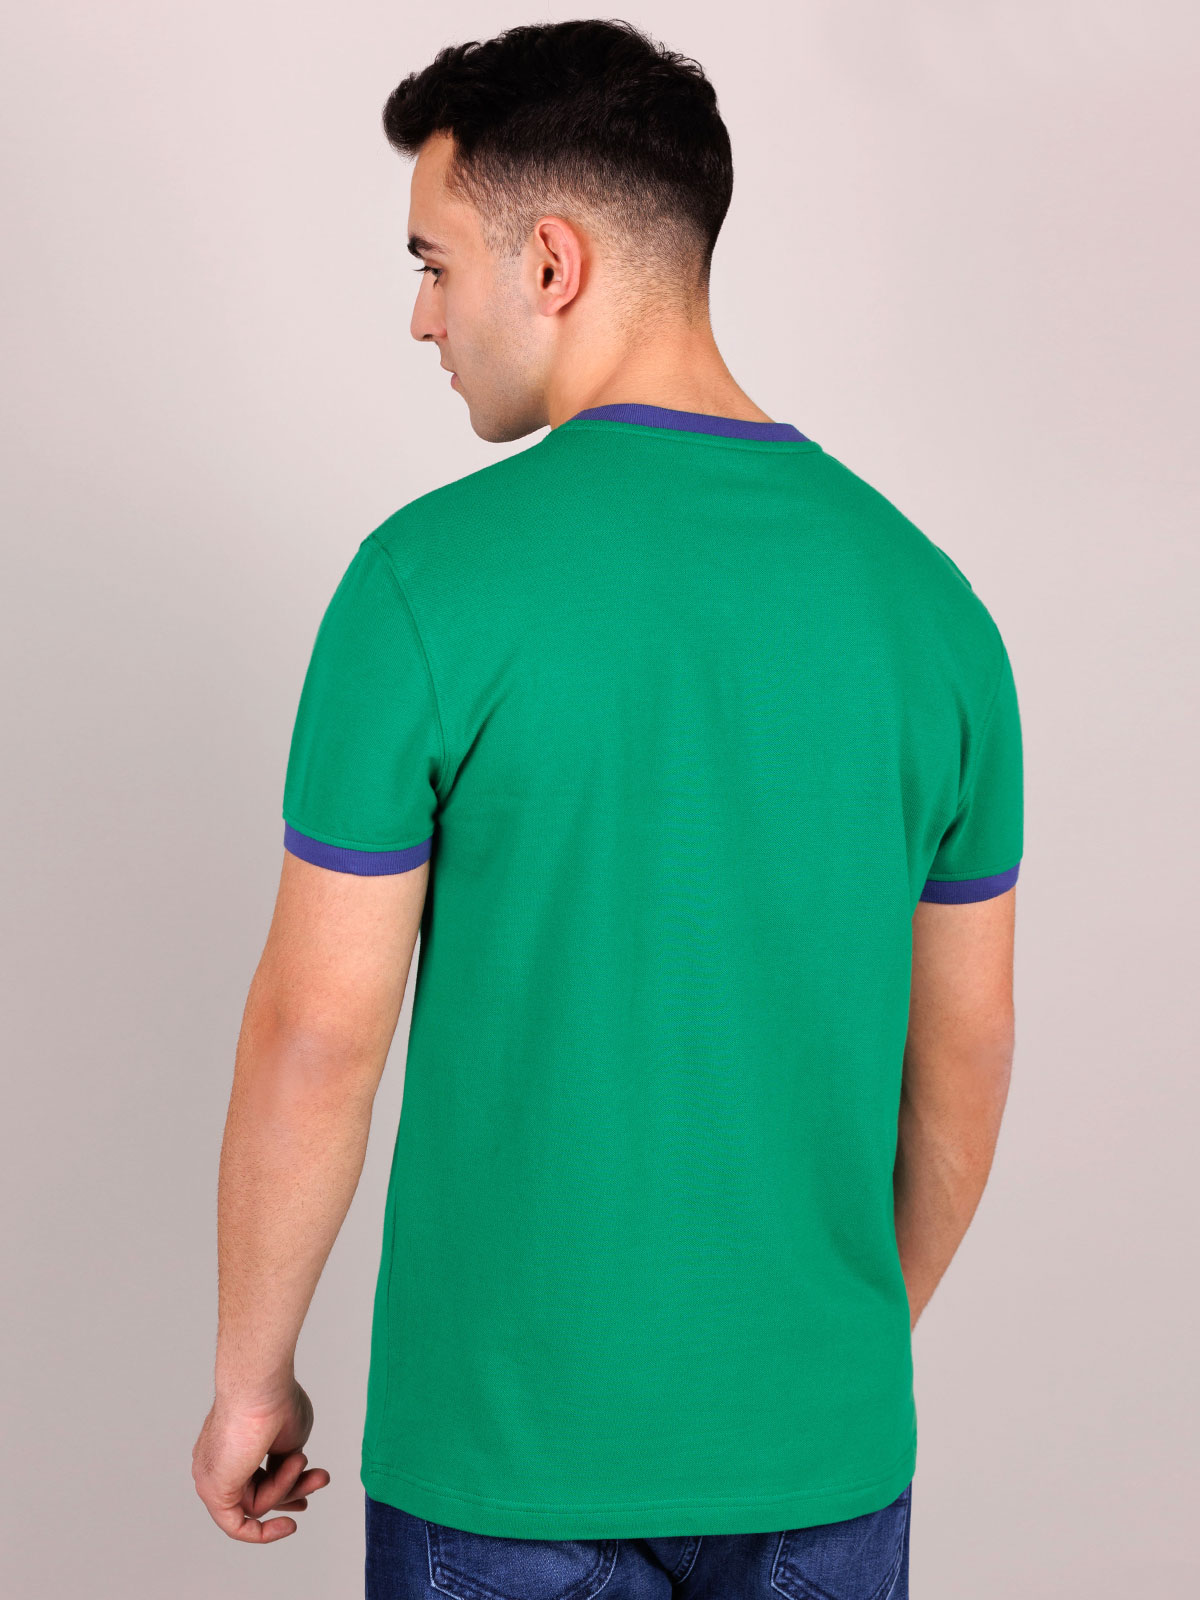 Tshirt in green with a summer design - 95367 € 23.62 img4